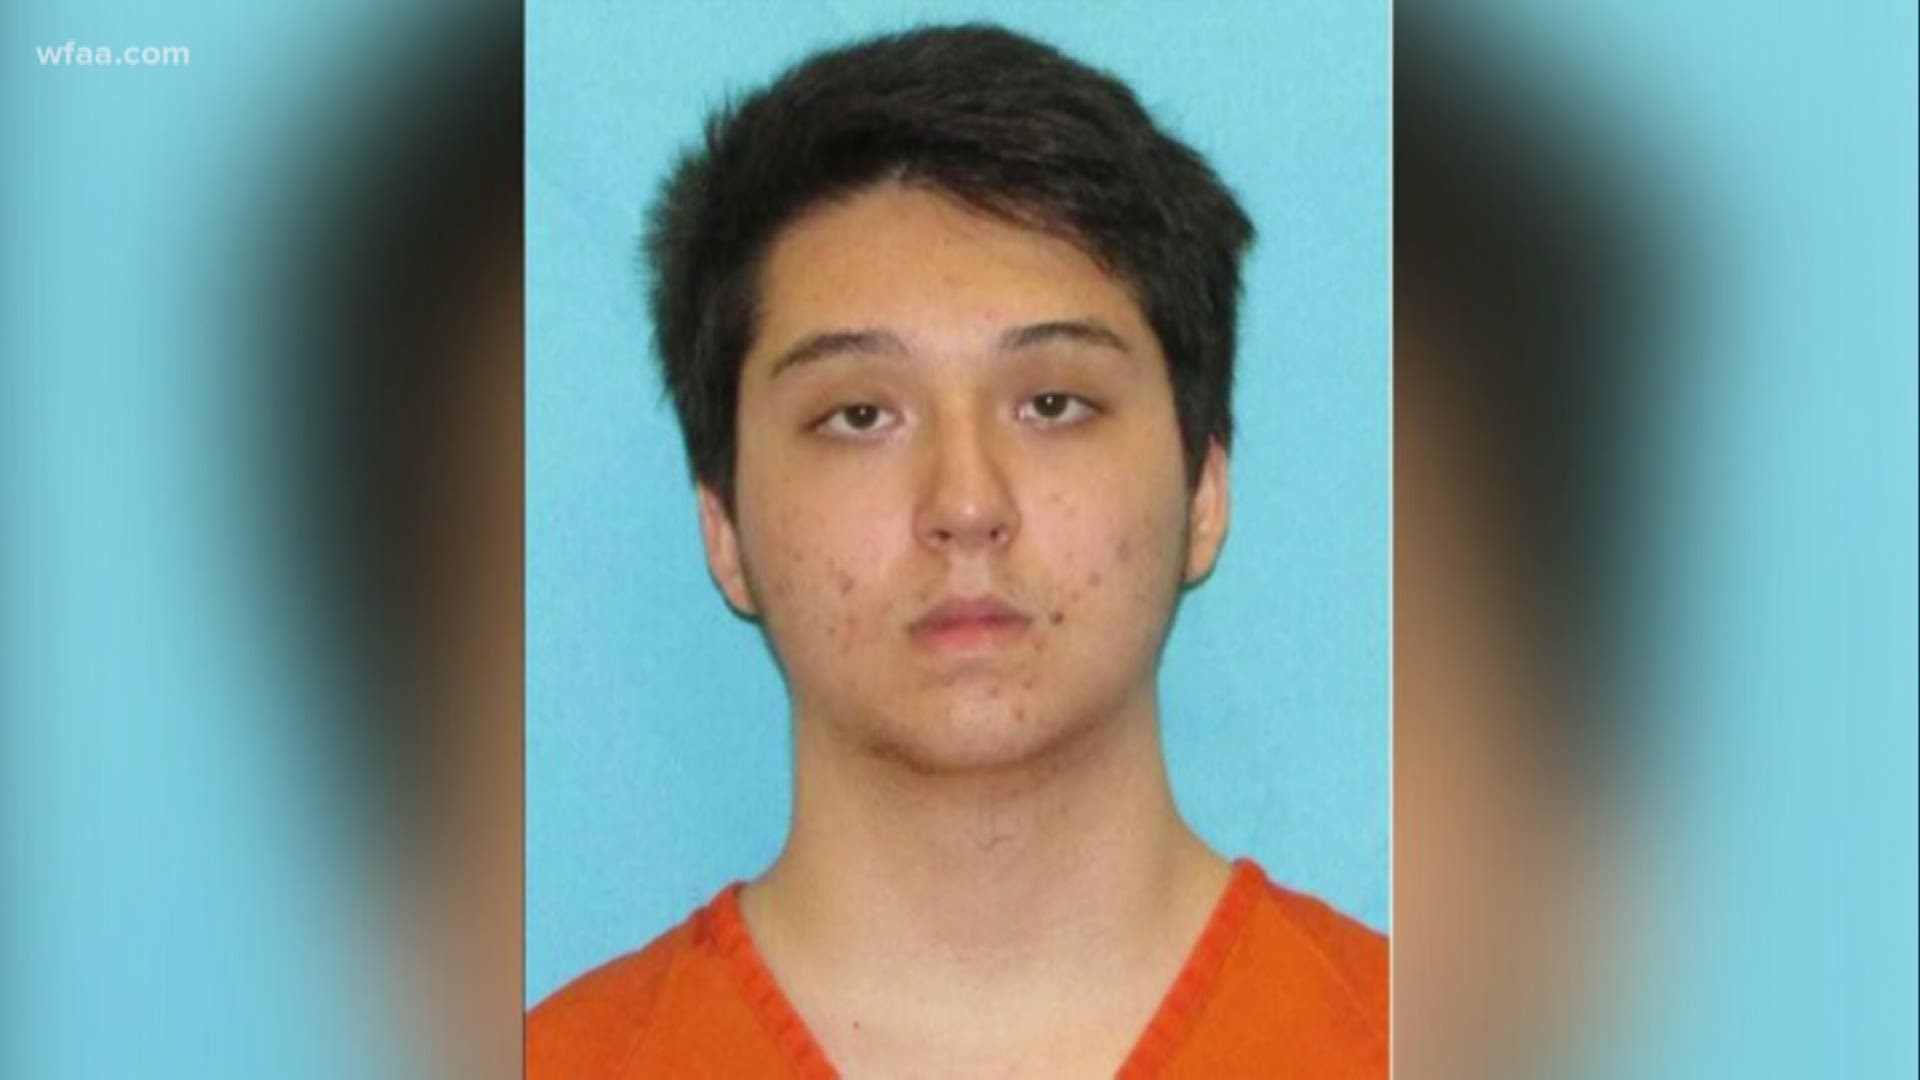 According to authorities, Matin Azizi-Yarand, then 17 and a student at Plano West High School, planned to attack for last May at Stonebriar Centre mall in Frisco.